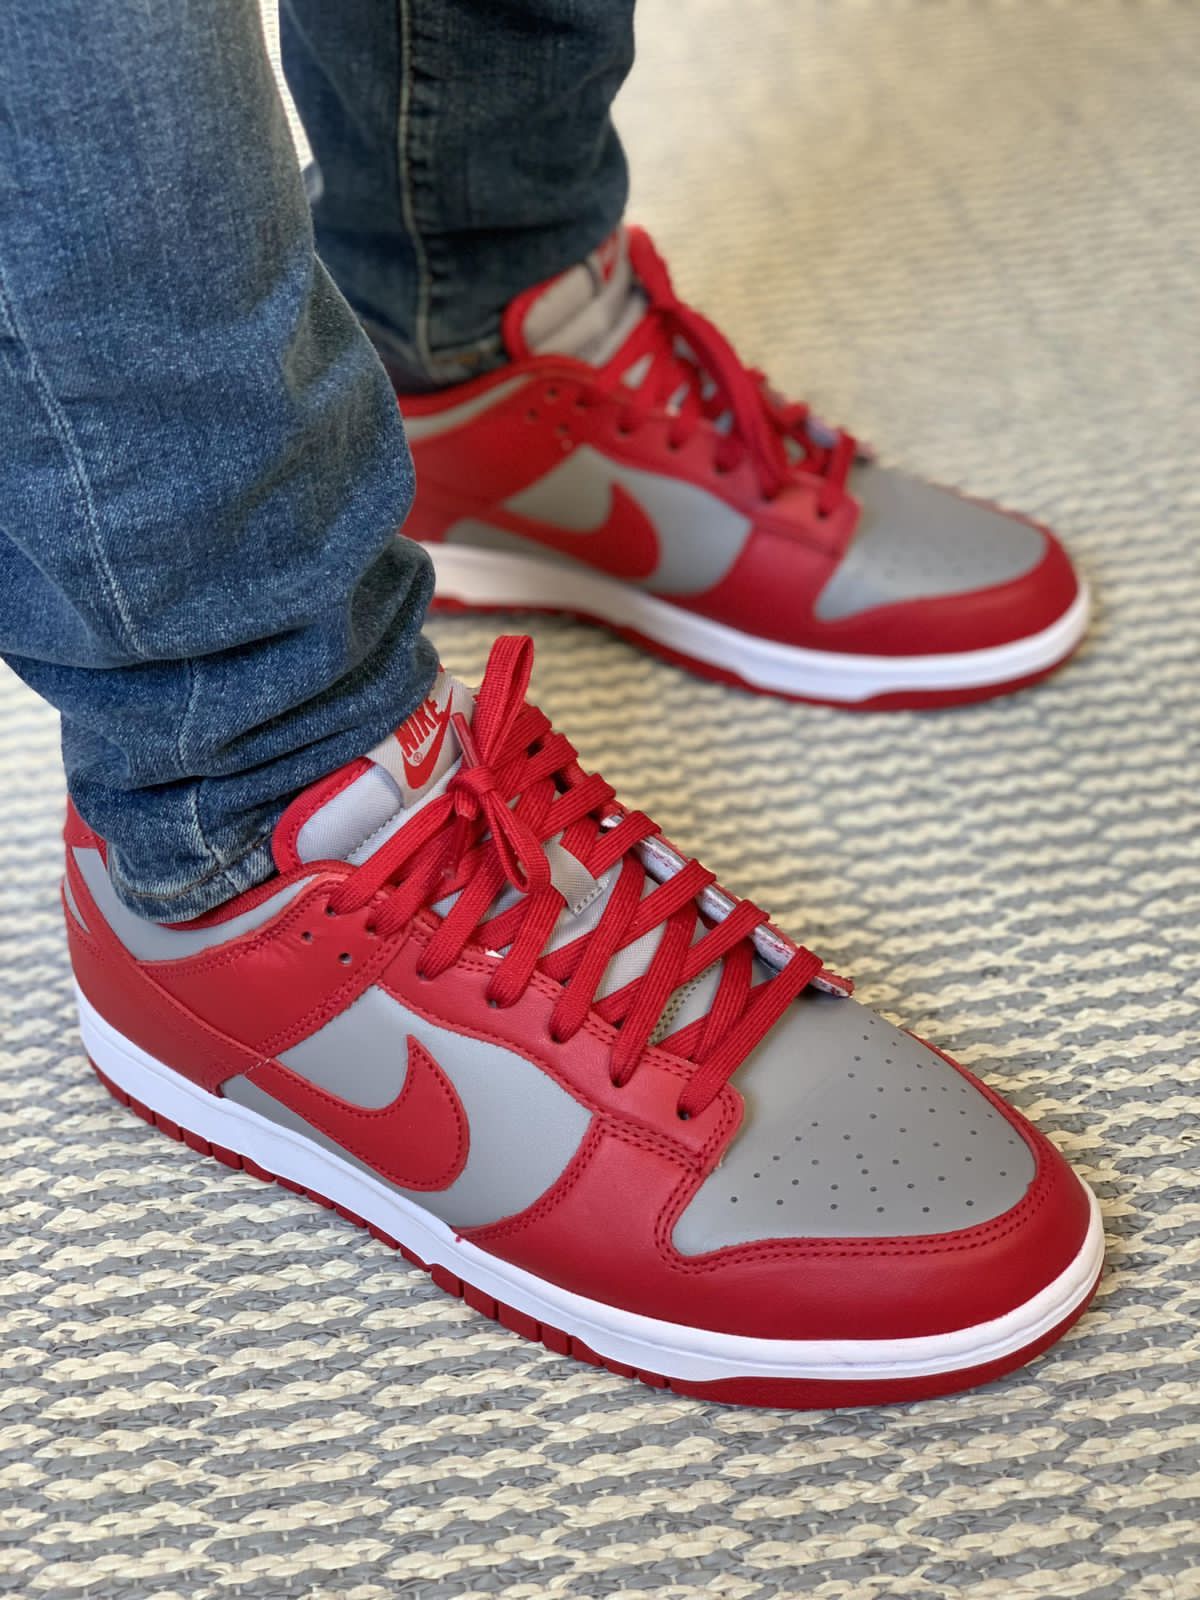 SB Dunk University Red Sneakers For Boys